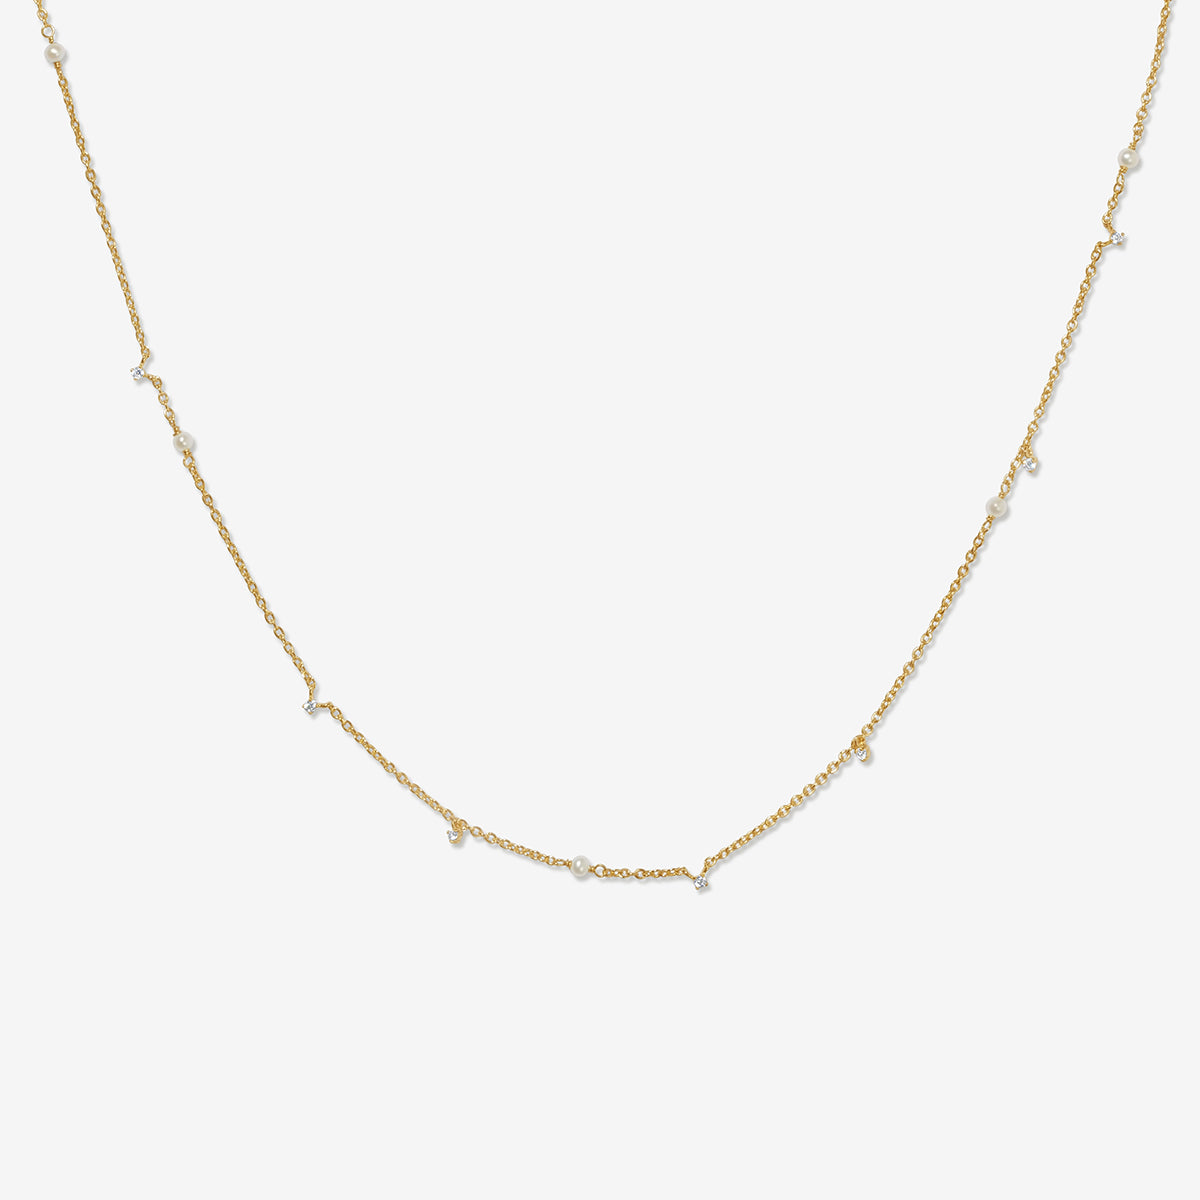 Parsely pearl necklace